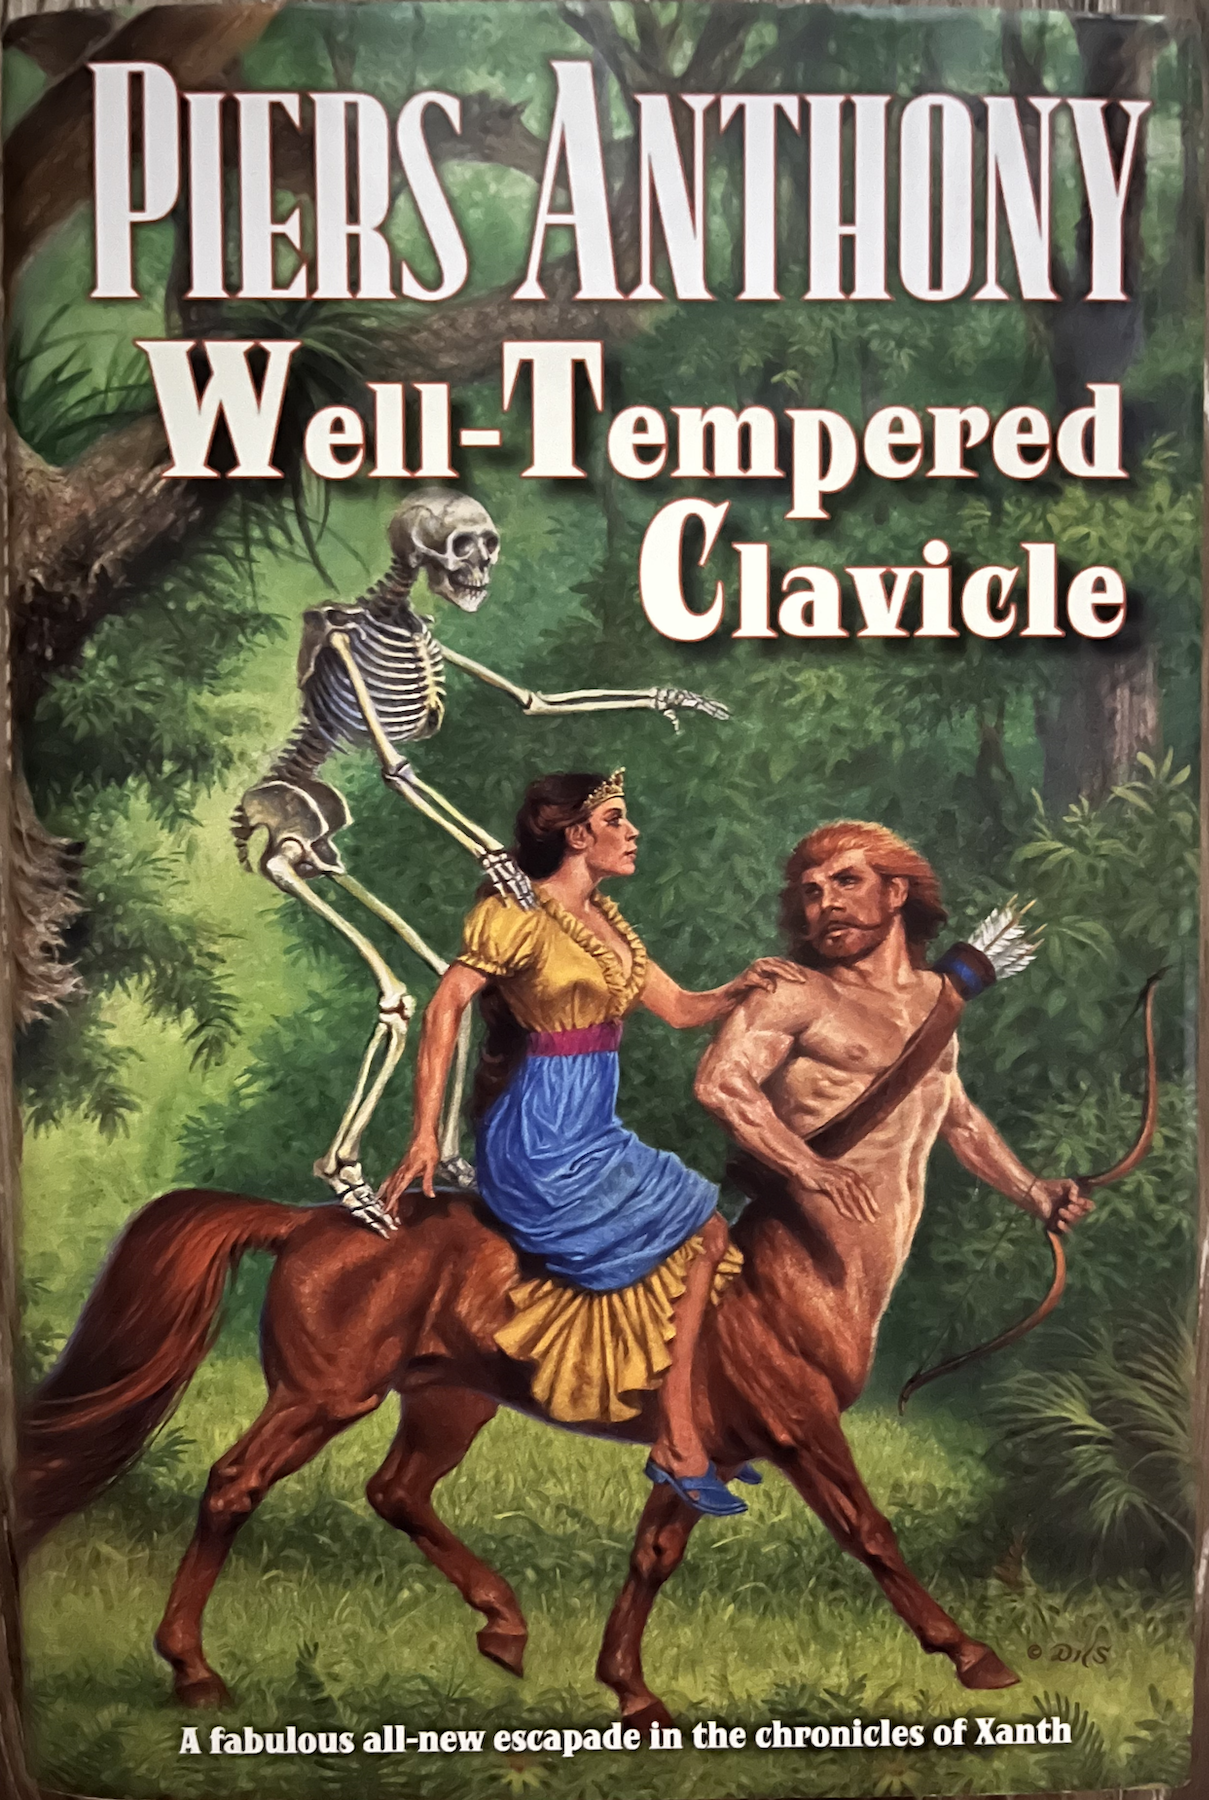 Well-Tempered Clavicle hardback cover